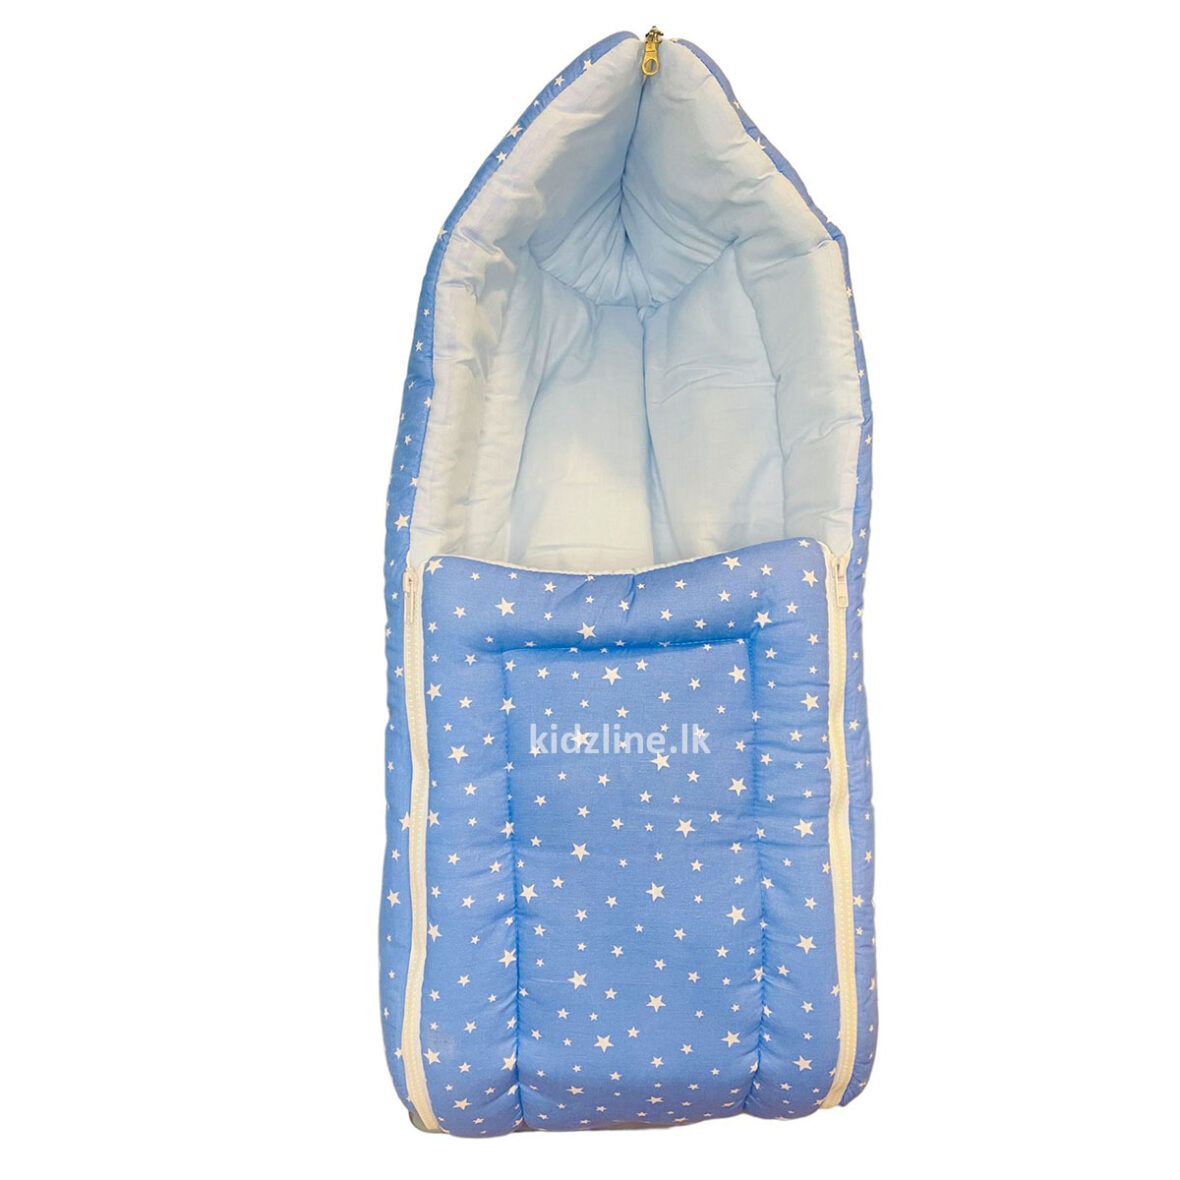 100% Cotton Material Baby Printed Sleeping Bag ( Blue )